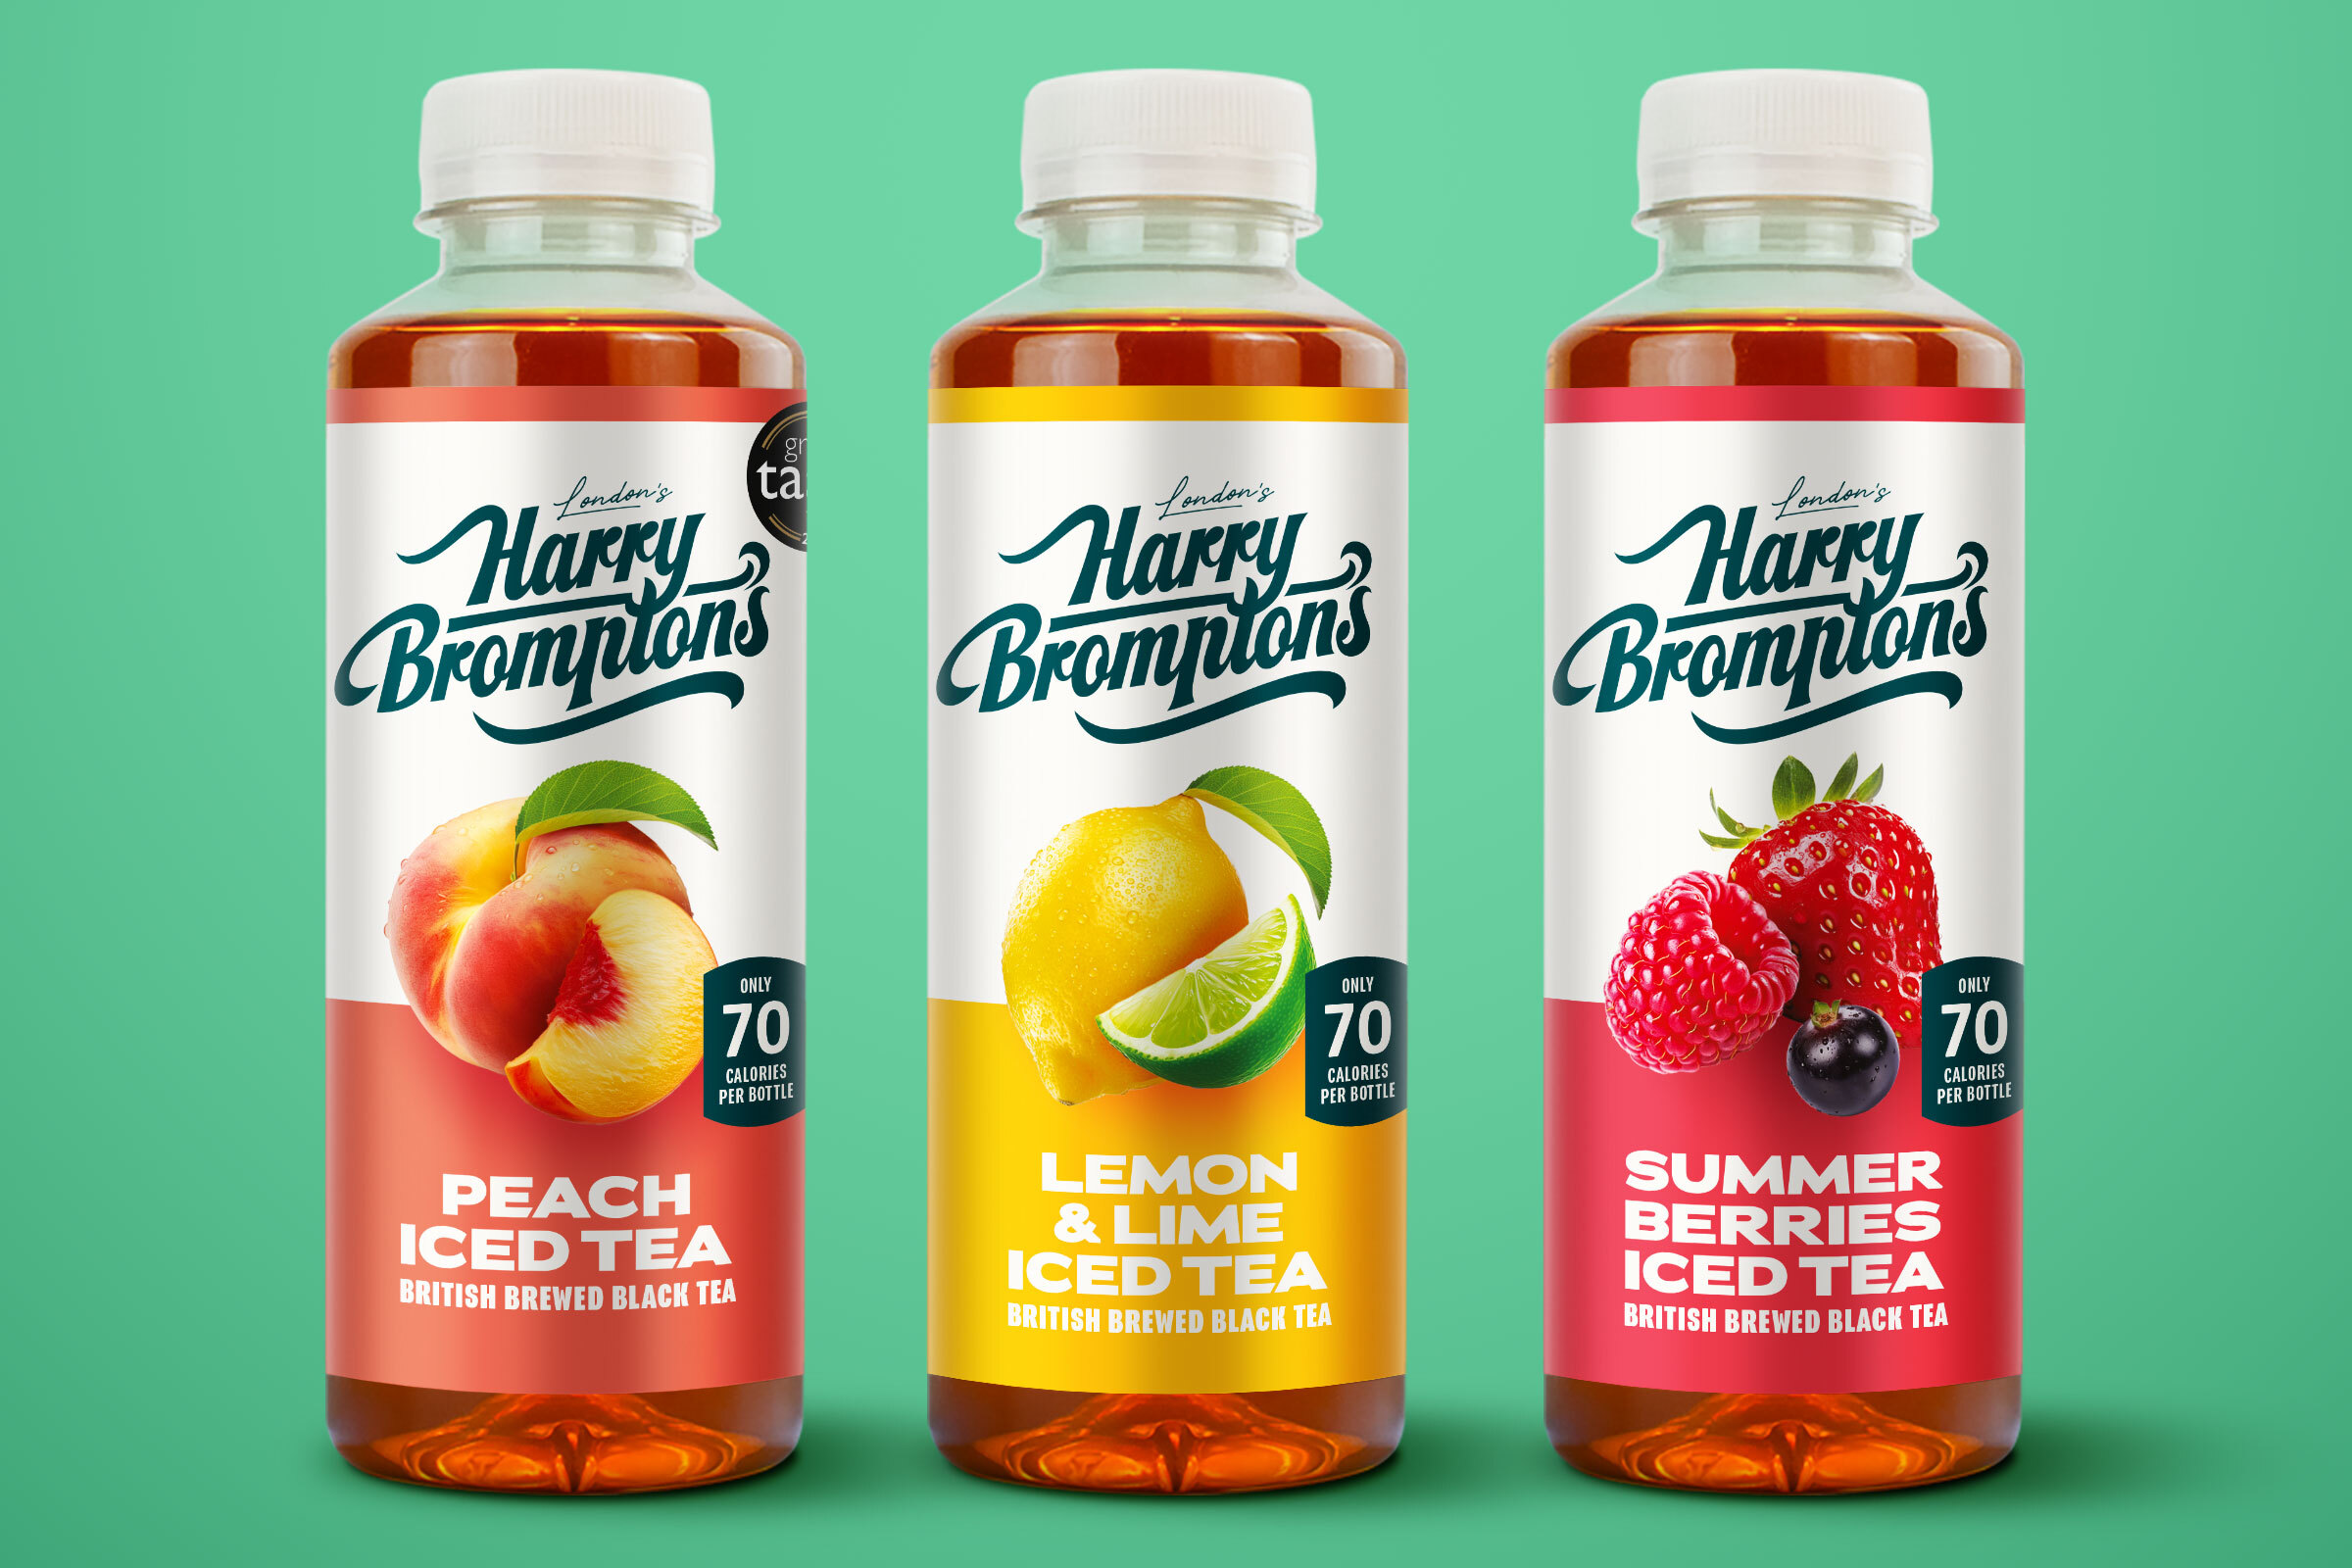 Iconic Harry Brompton’s Iced Tea Packaging Redesigned by Gency and New Summer Berries Flavour Hits the Shelves